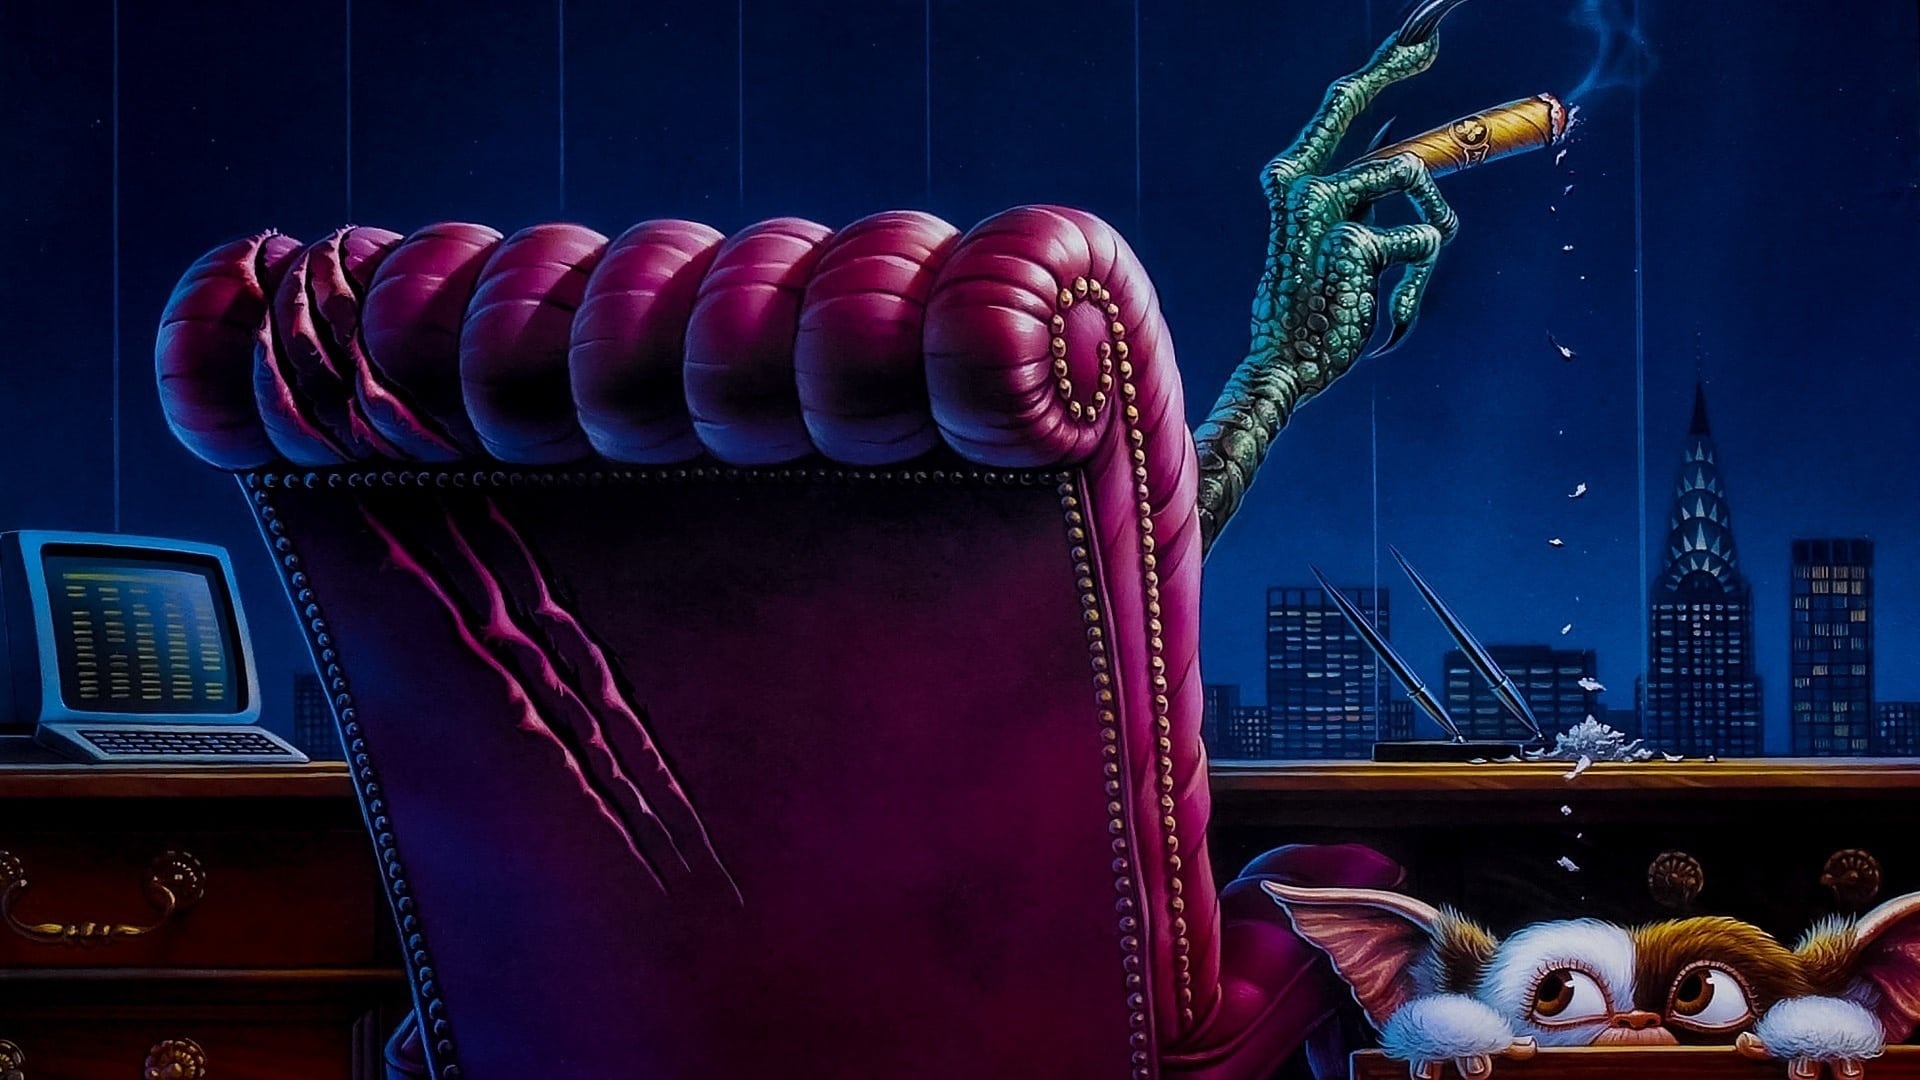 Movie Gremlins 2: The New Batch HD Wallpaper | Background Image